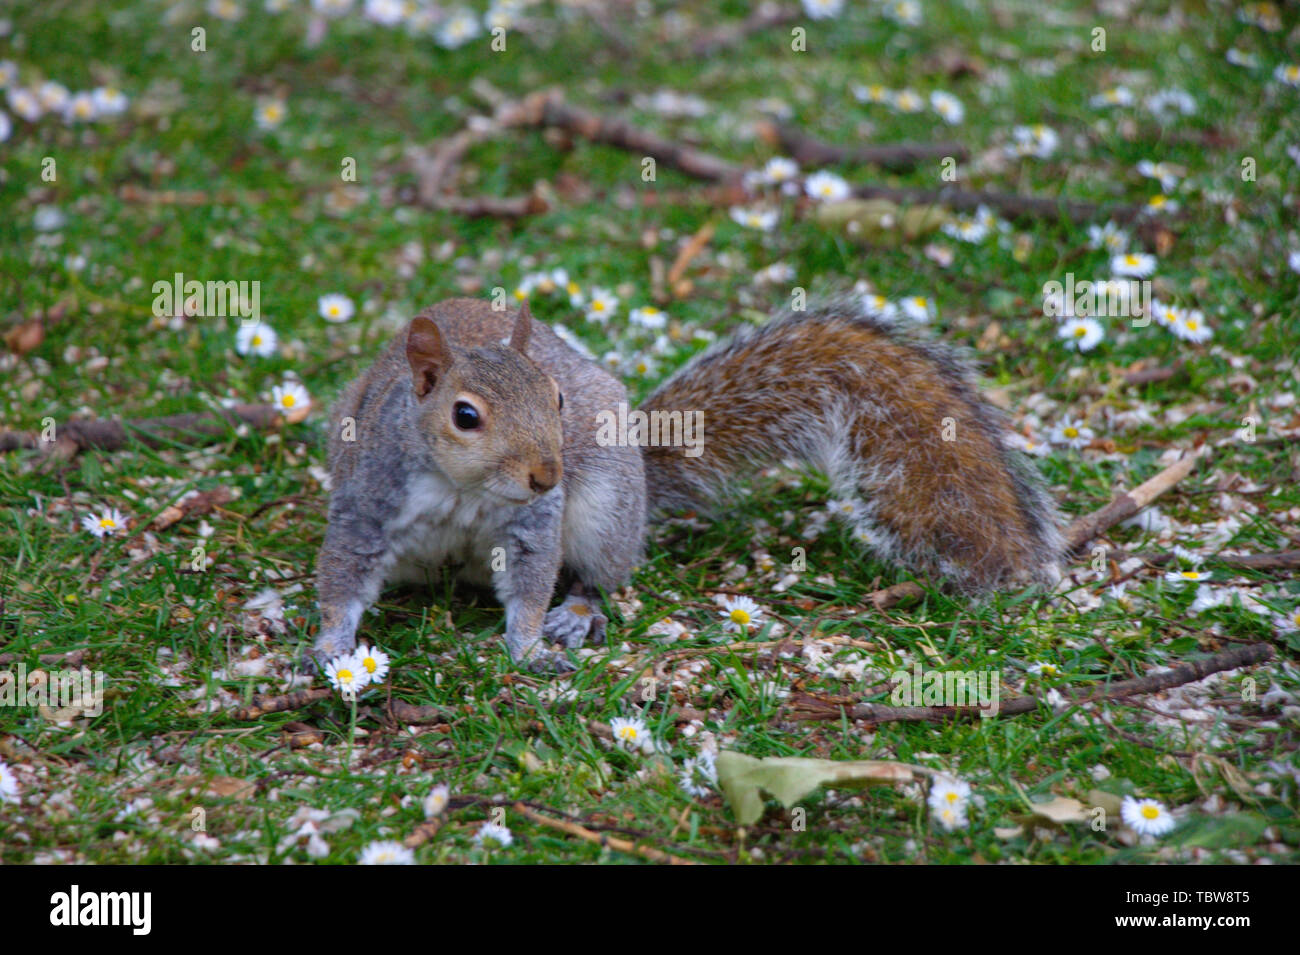 Grey squirrel standing on a lawn with daisies. Stock Photo